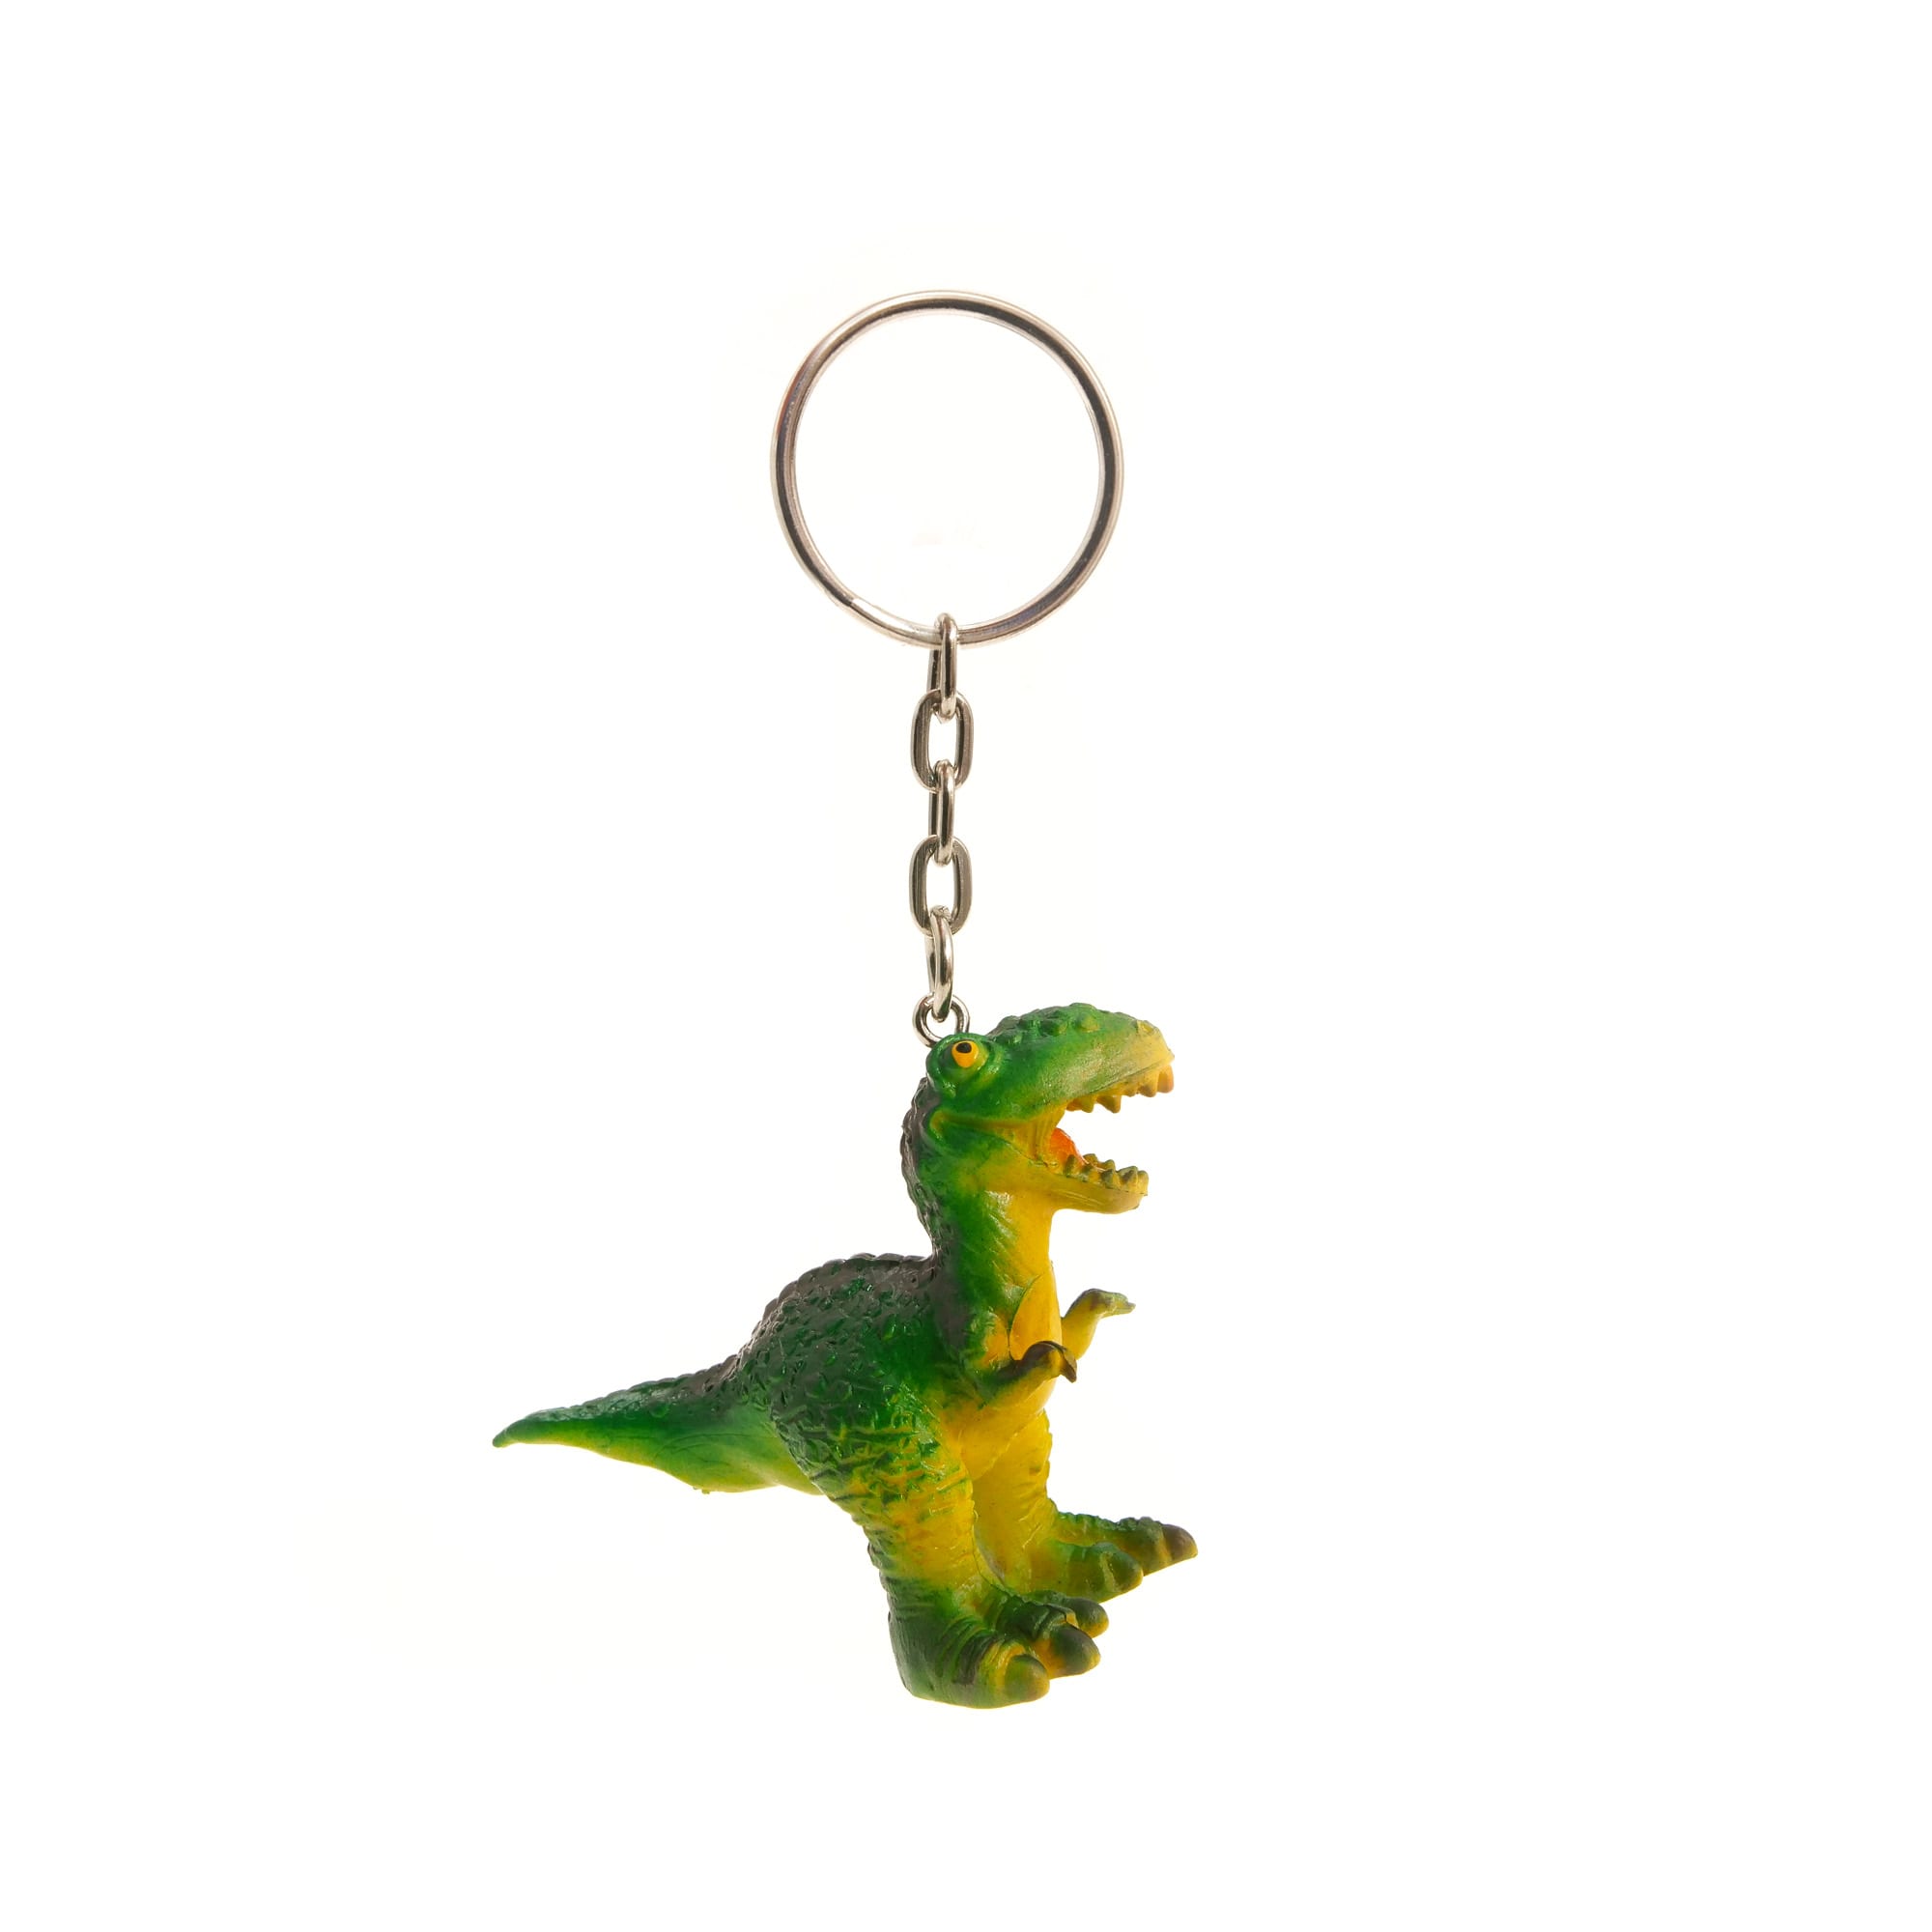 Bag charm name tag wooden children’s personalised dinosaur badge luggage Accessories Keychains & Lanyards Zipper Charms 